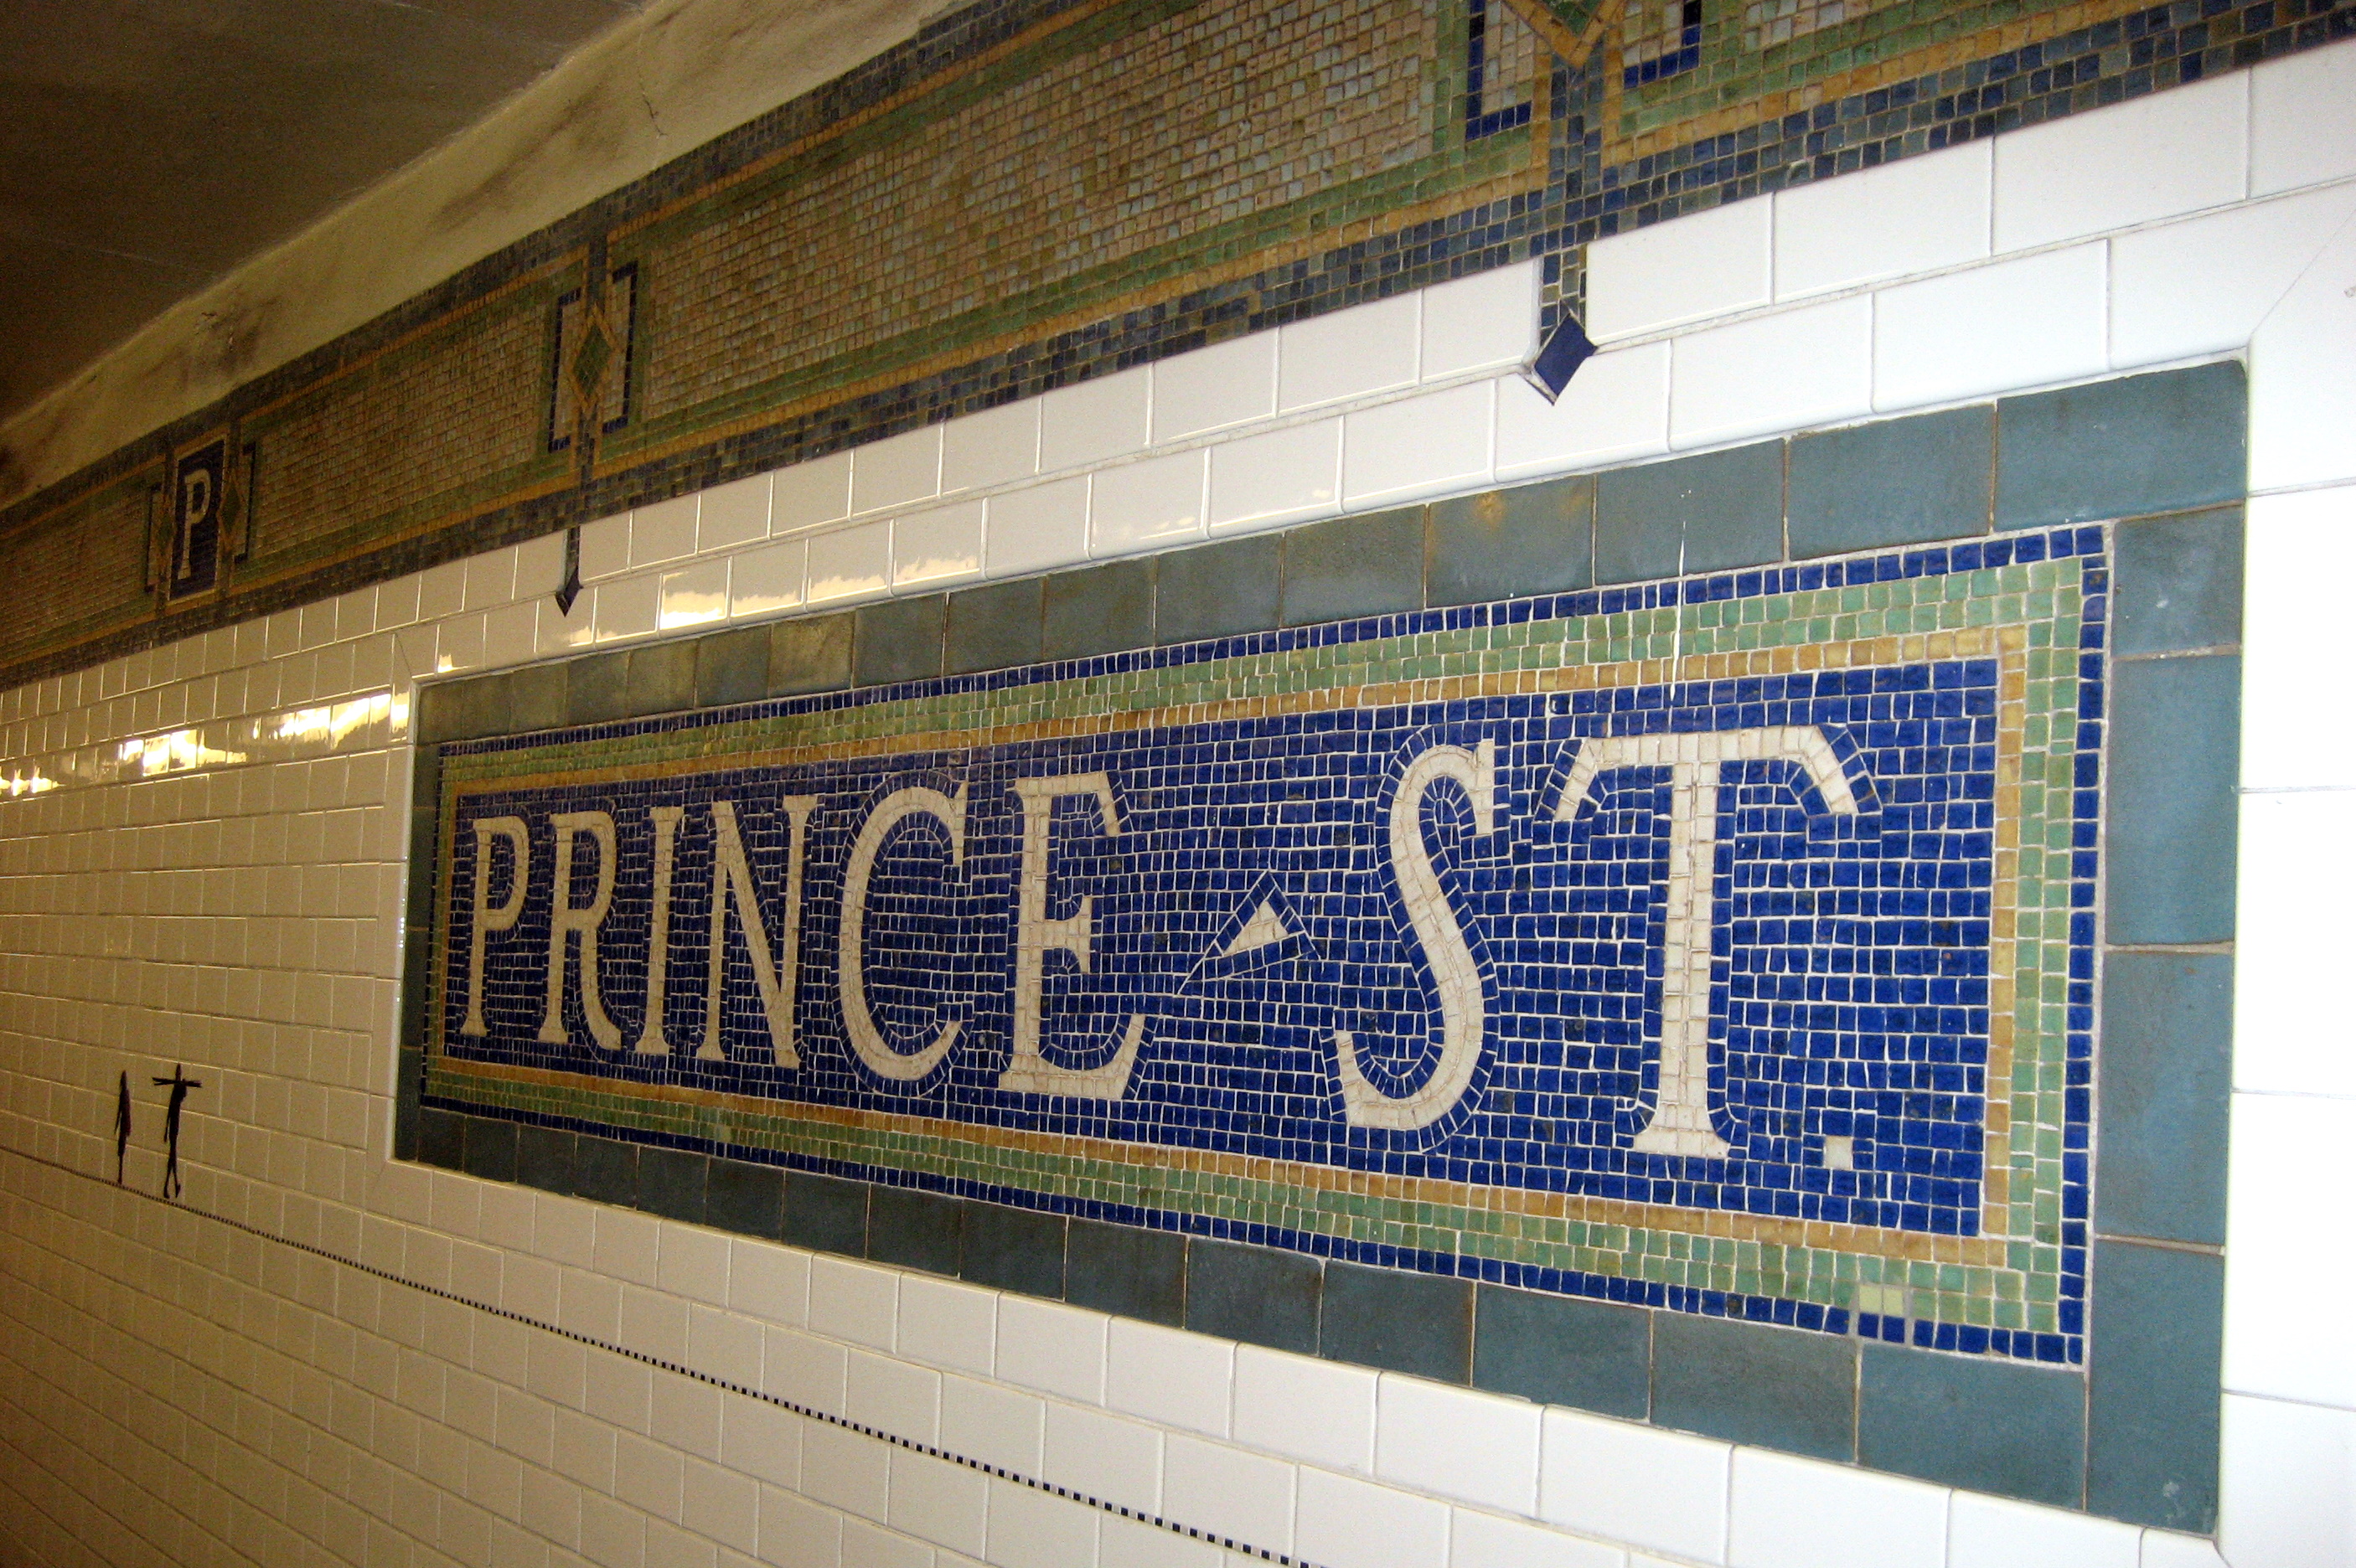 NYC - SoHo: Prince Street Station Opened on April 14, 1918, the Prince Street station, on the BMT Broadway line, services the N, R and W trains. A renovation in 2001 restored the original name tablet mosaics and tile band. Prince Street was named by the British and was one of the few streets not to be renamed after the Revolution. The platform walls are adorned with the 2004 artwork, Carrying On, by Janet Zweig and Edward Del Rosario. The water jet-cut steel, marbele, and slate frieze running a total of 1,200 feet is composed of 194 silhouettes of people hauling "stuff" with them as they walk the city streets and subways.